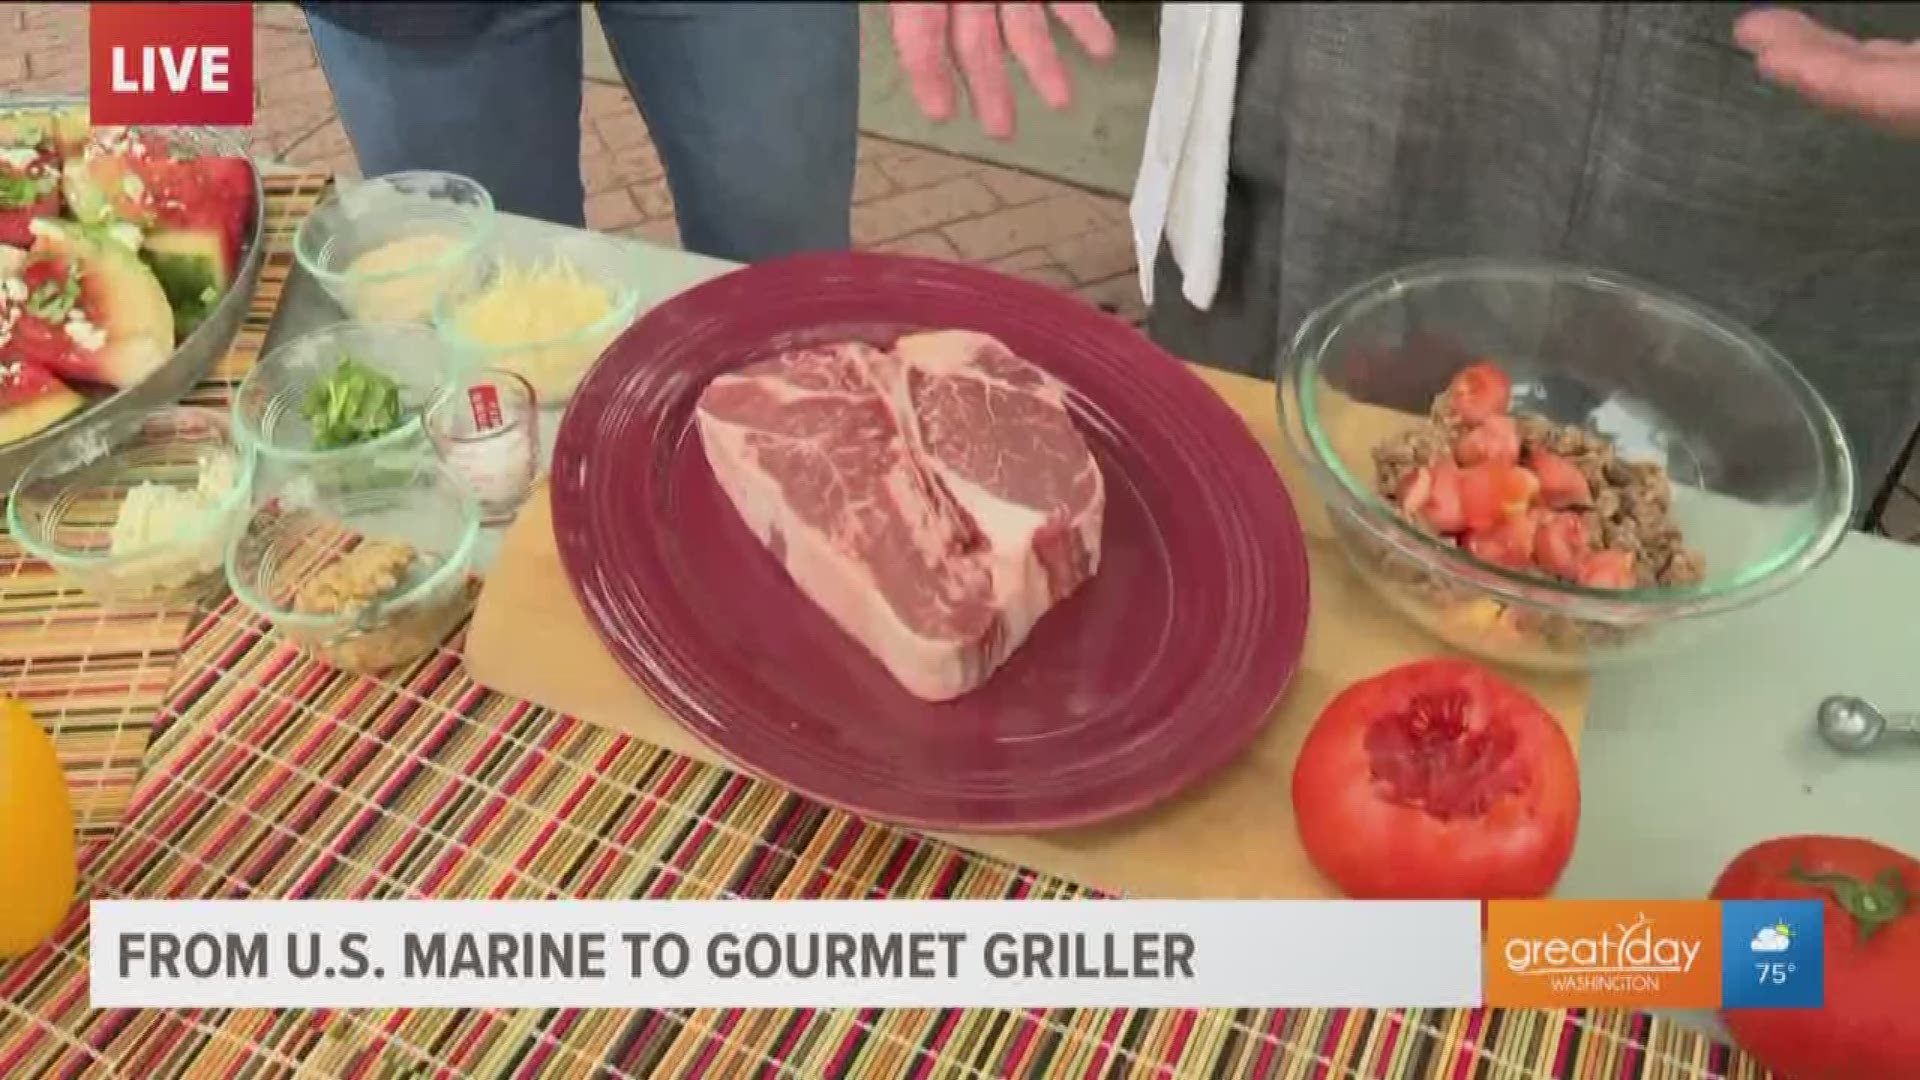 From U.S. Marine to Gourmet Griller, ___ gets ready to grill an amazing steak with salt and sugar seasoning.